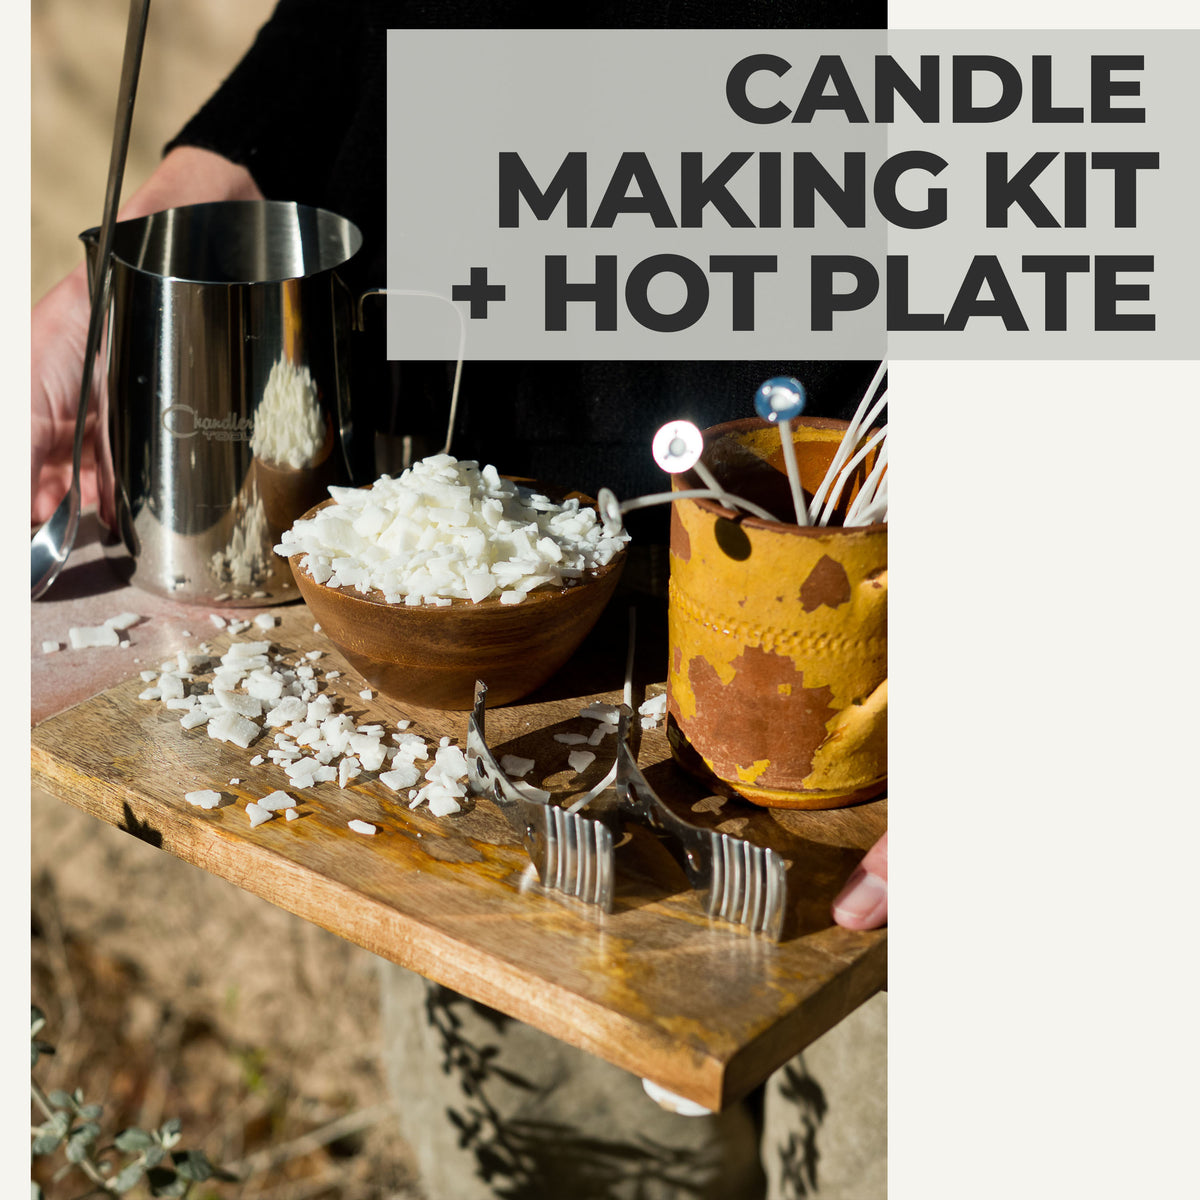 Candle Making Kit with Hot Plate 2 – Chandlertools